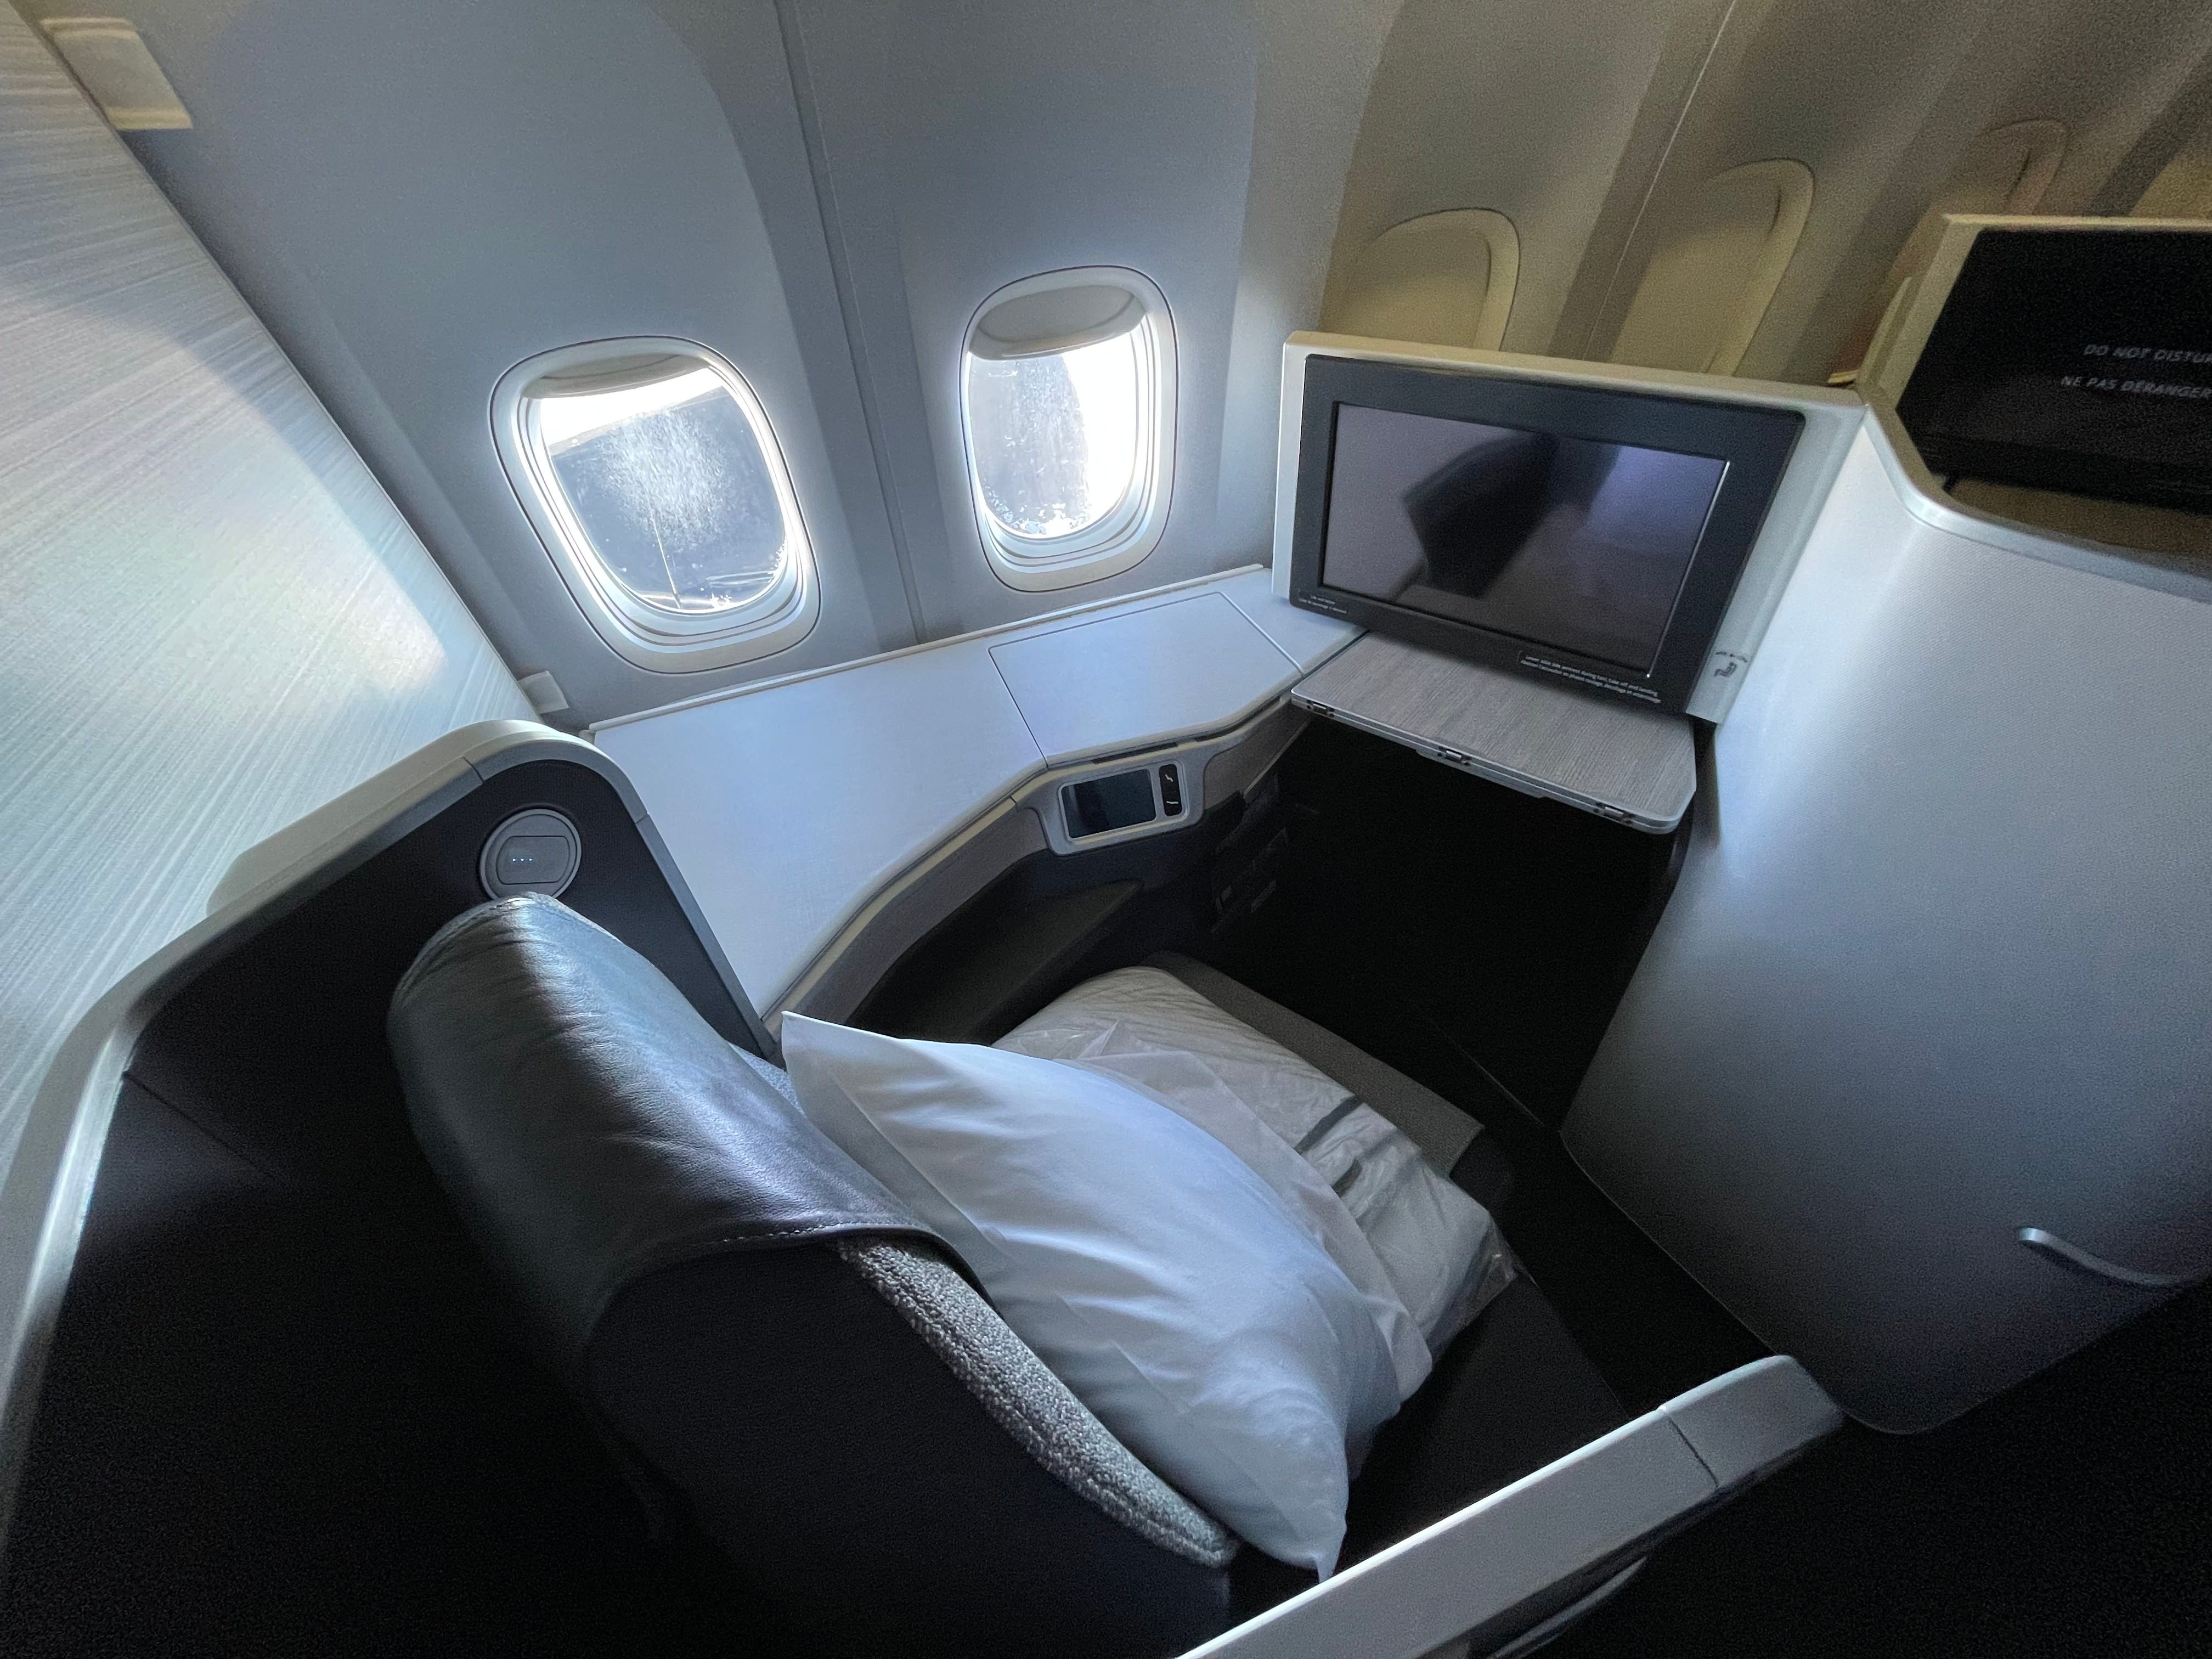 Flight Review: Air Canada’s Boeing 777 Business Class